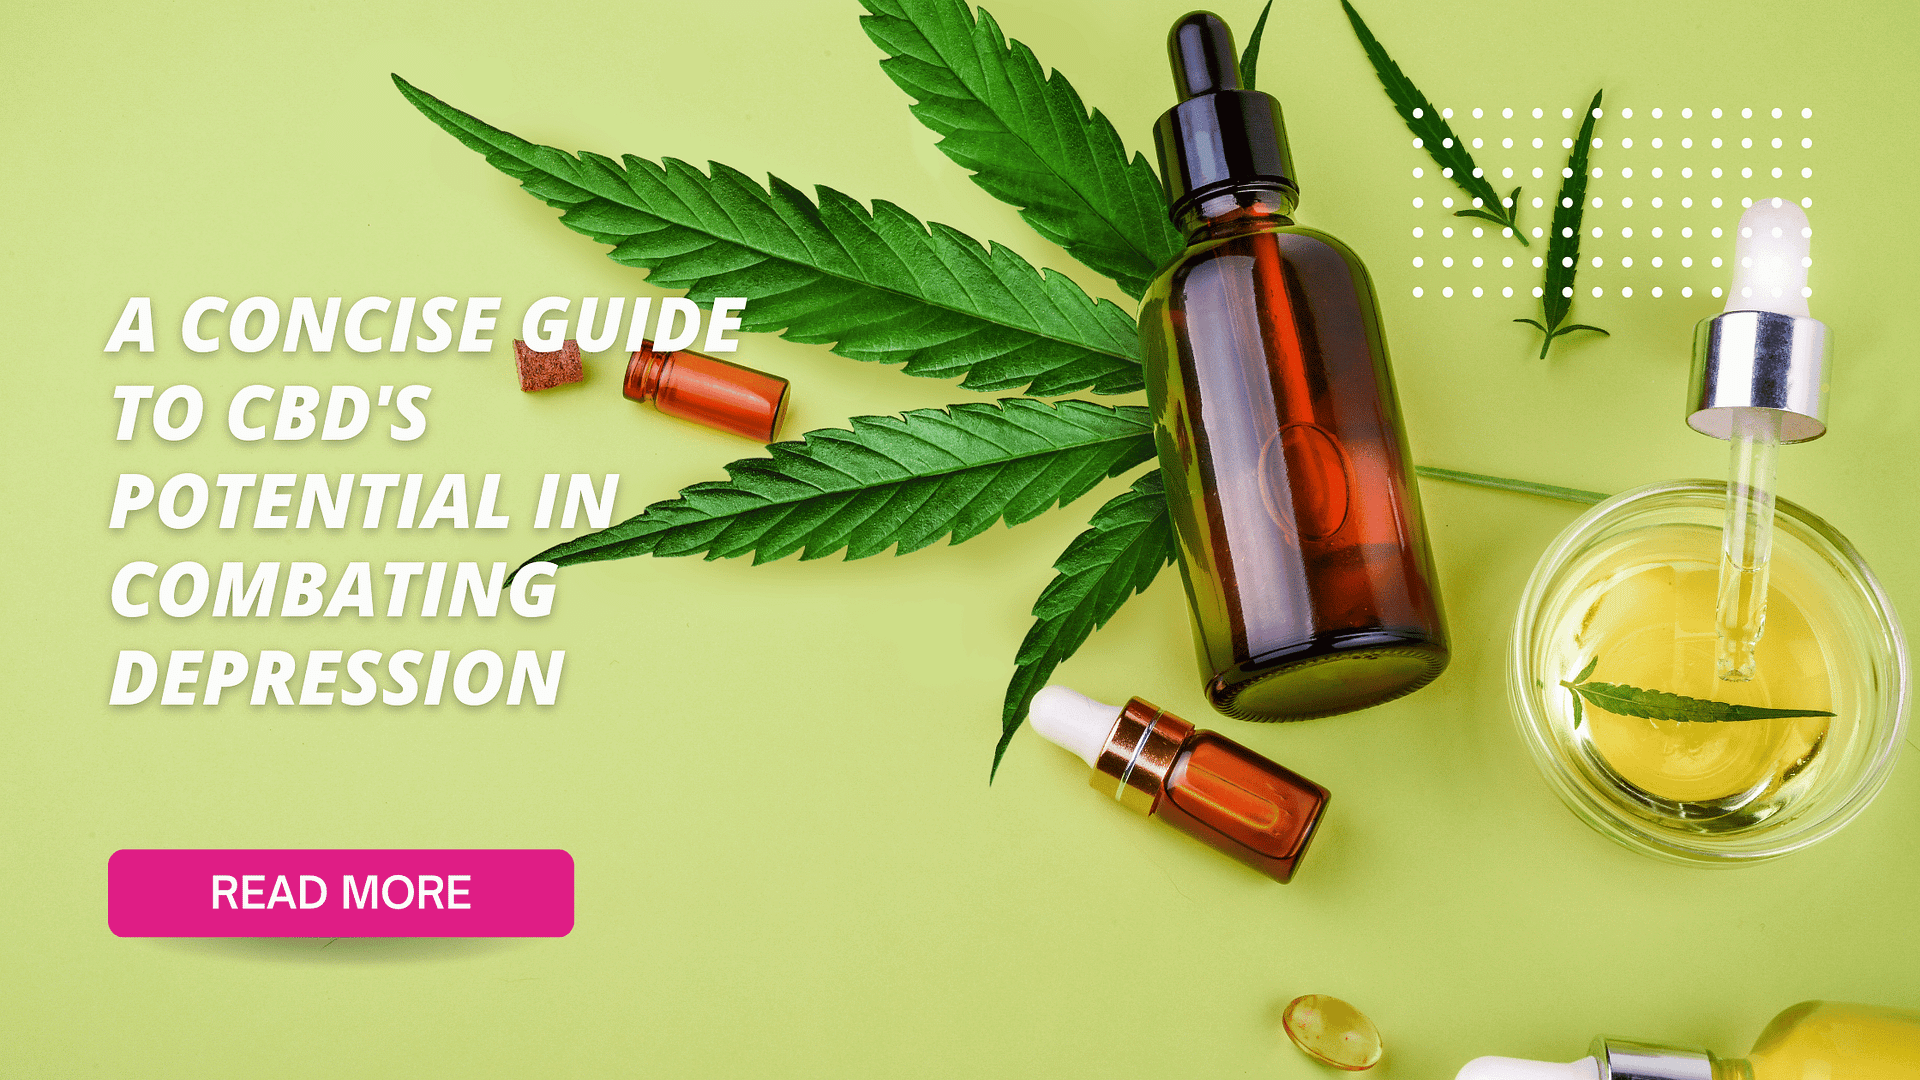 A Concise Guide to CBD's Potential in Combating Depression